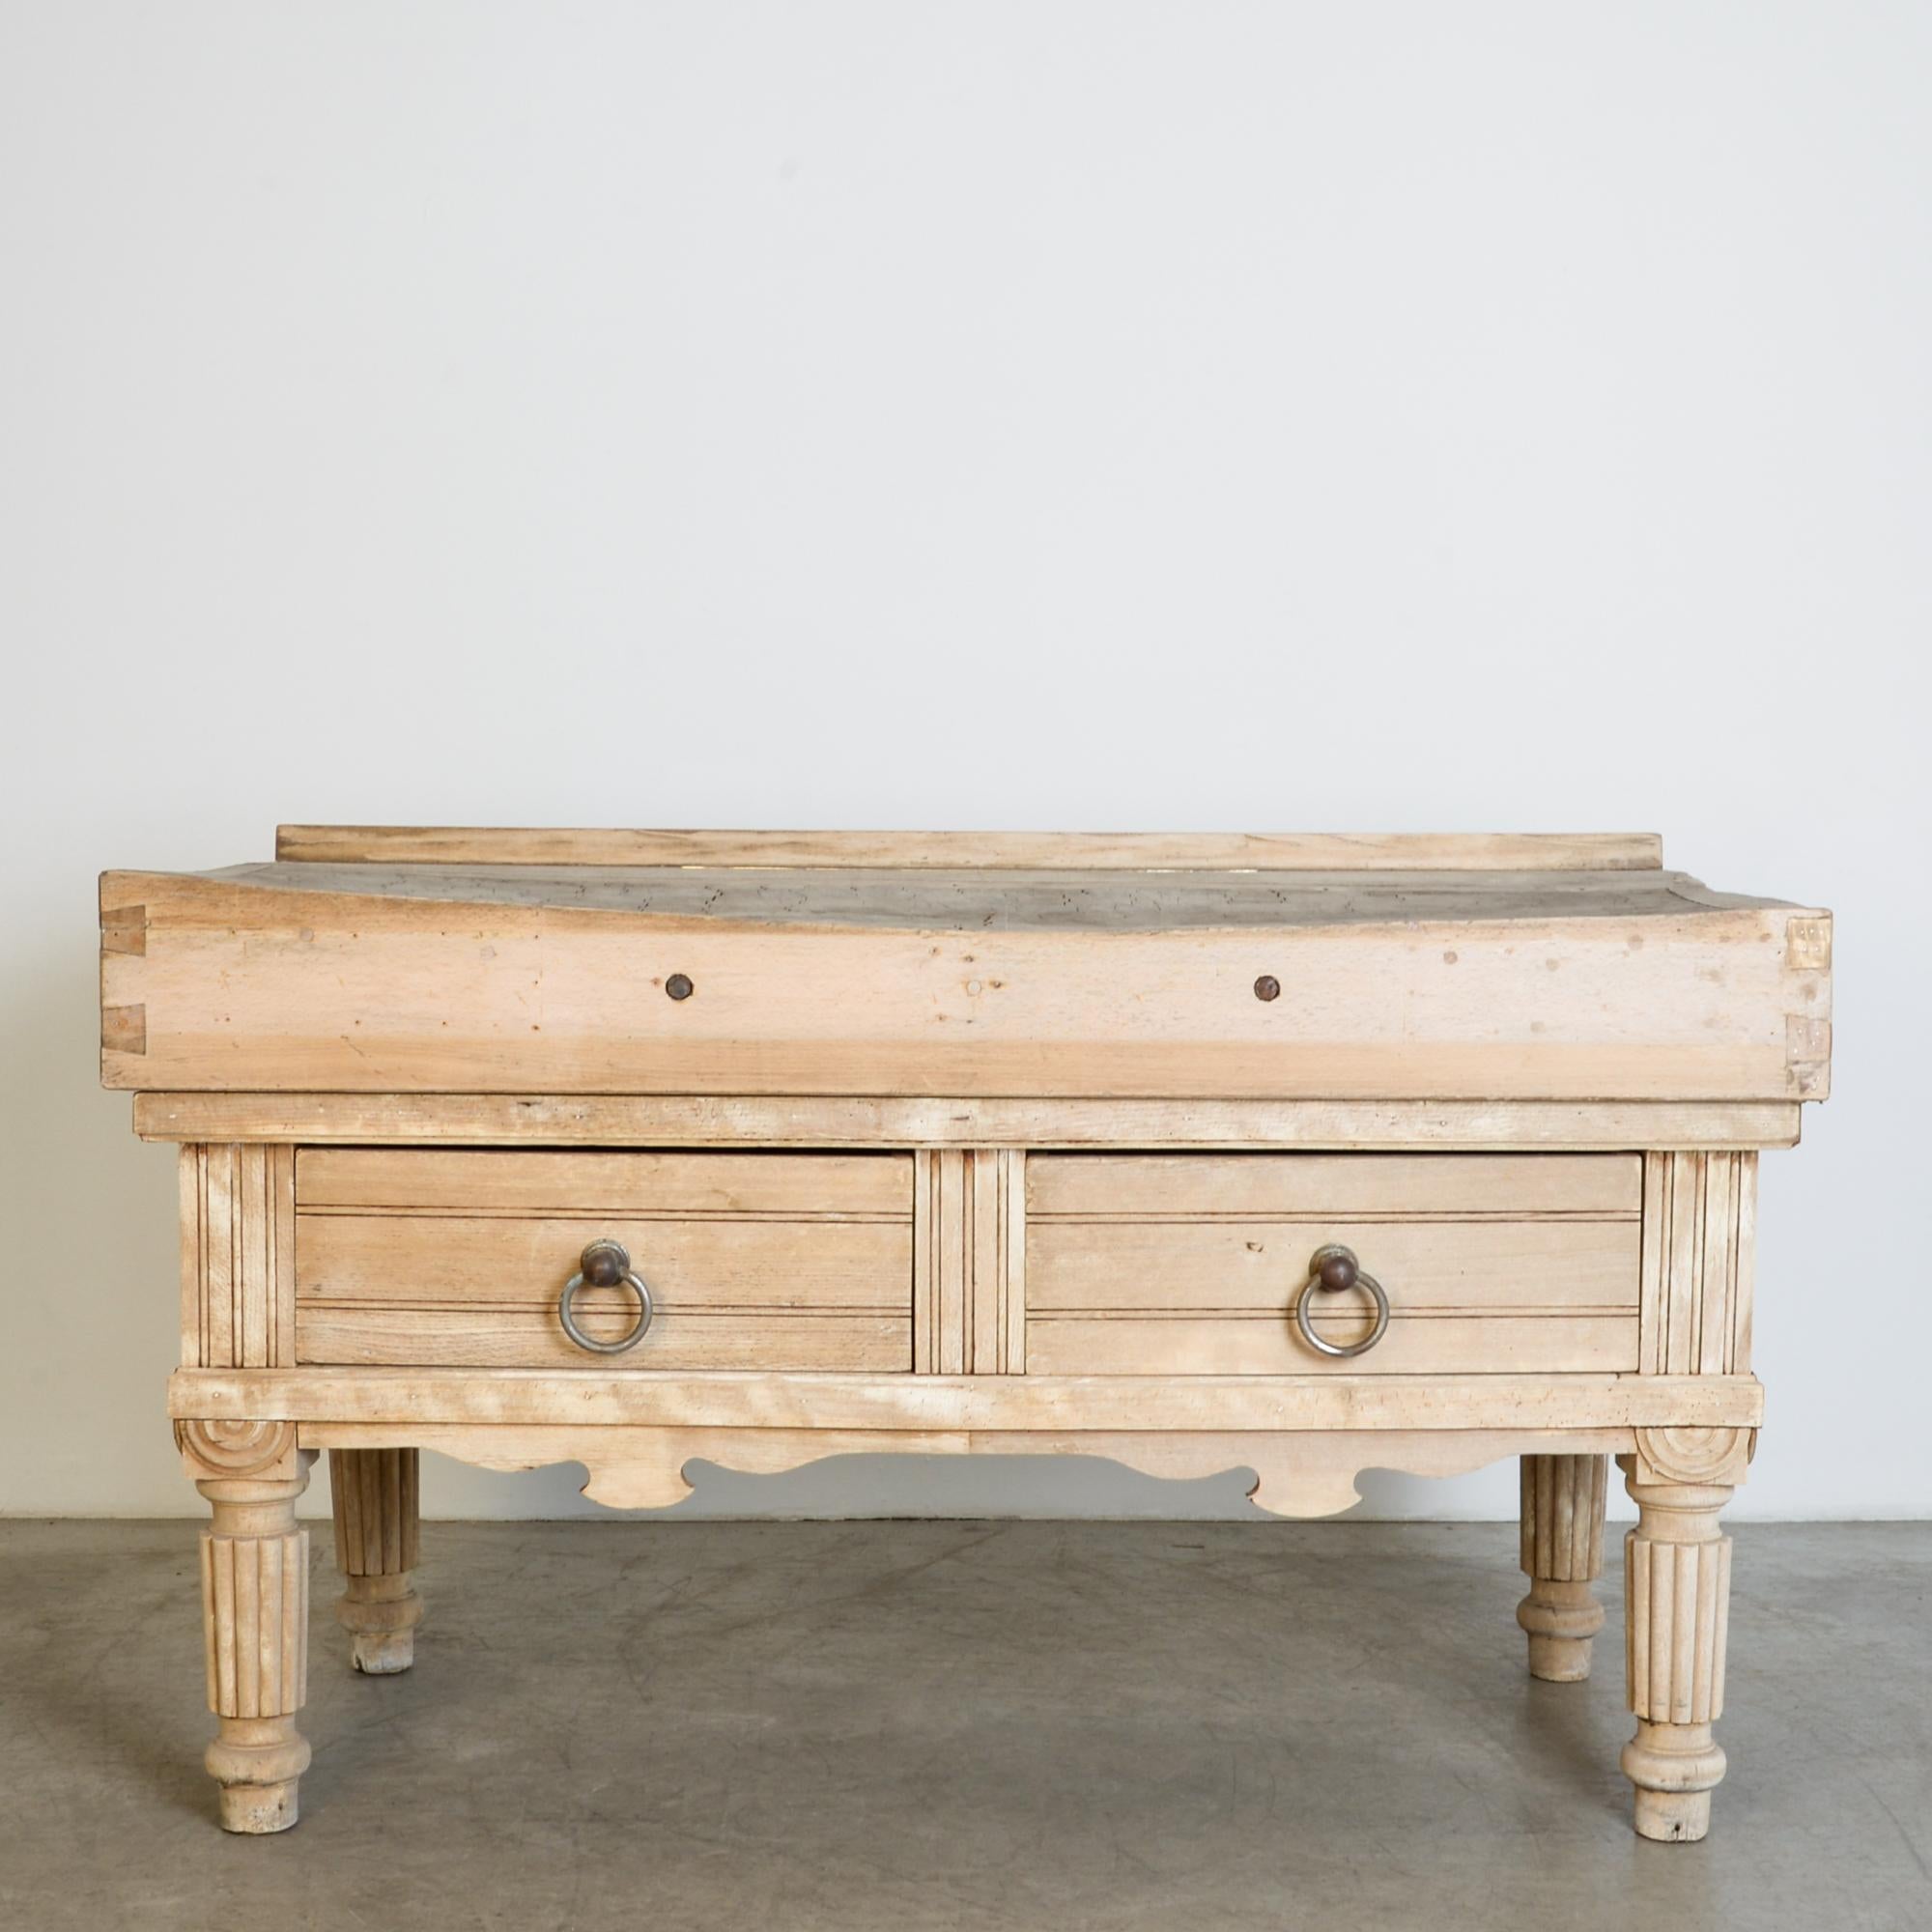 Ornate butcher block table from circa 1900, Belgium. This large scale butcher’s block is supported by handsome curved legs, the ornament of an era gone by. With wonderful architectural style moulding details and original hardware, this table has